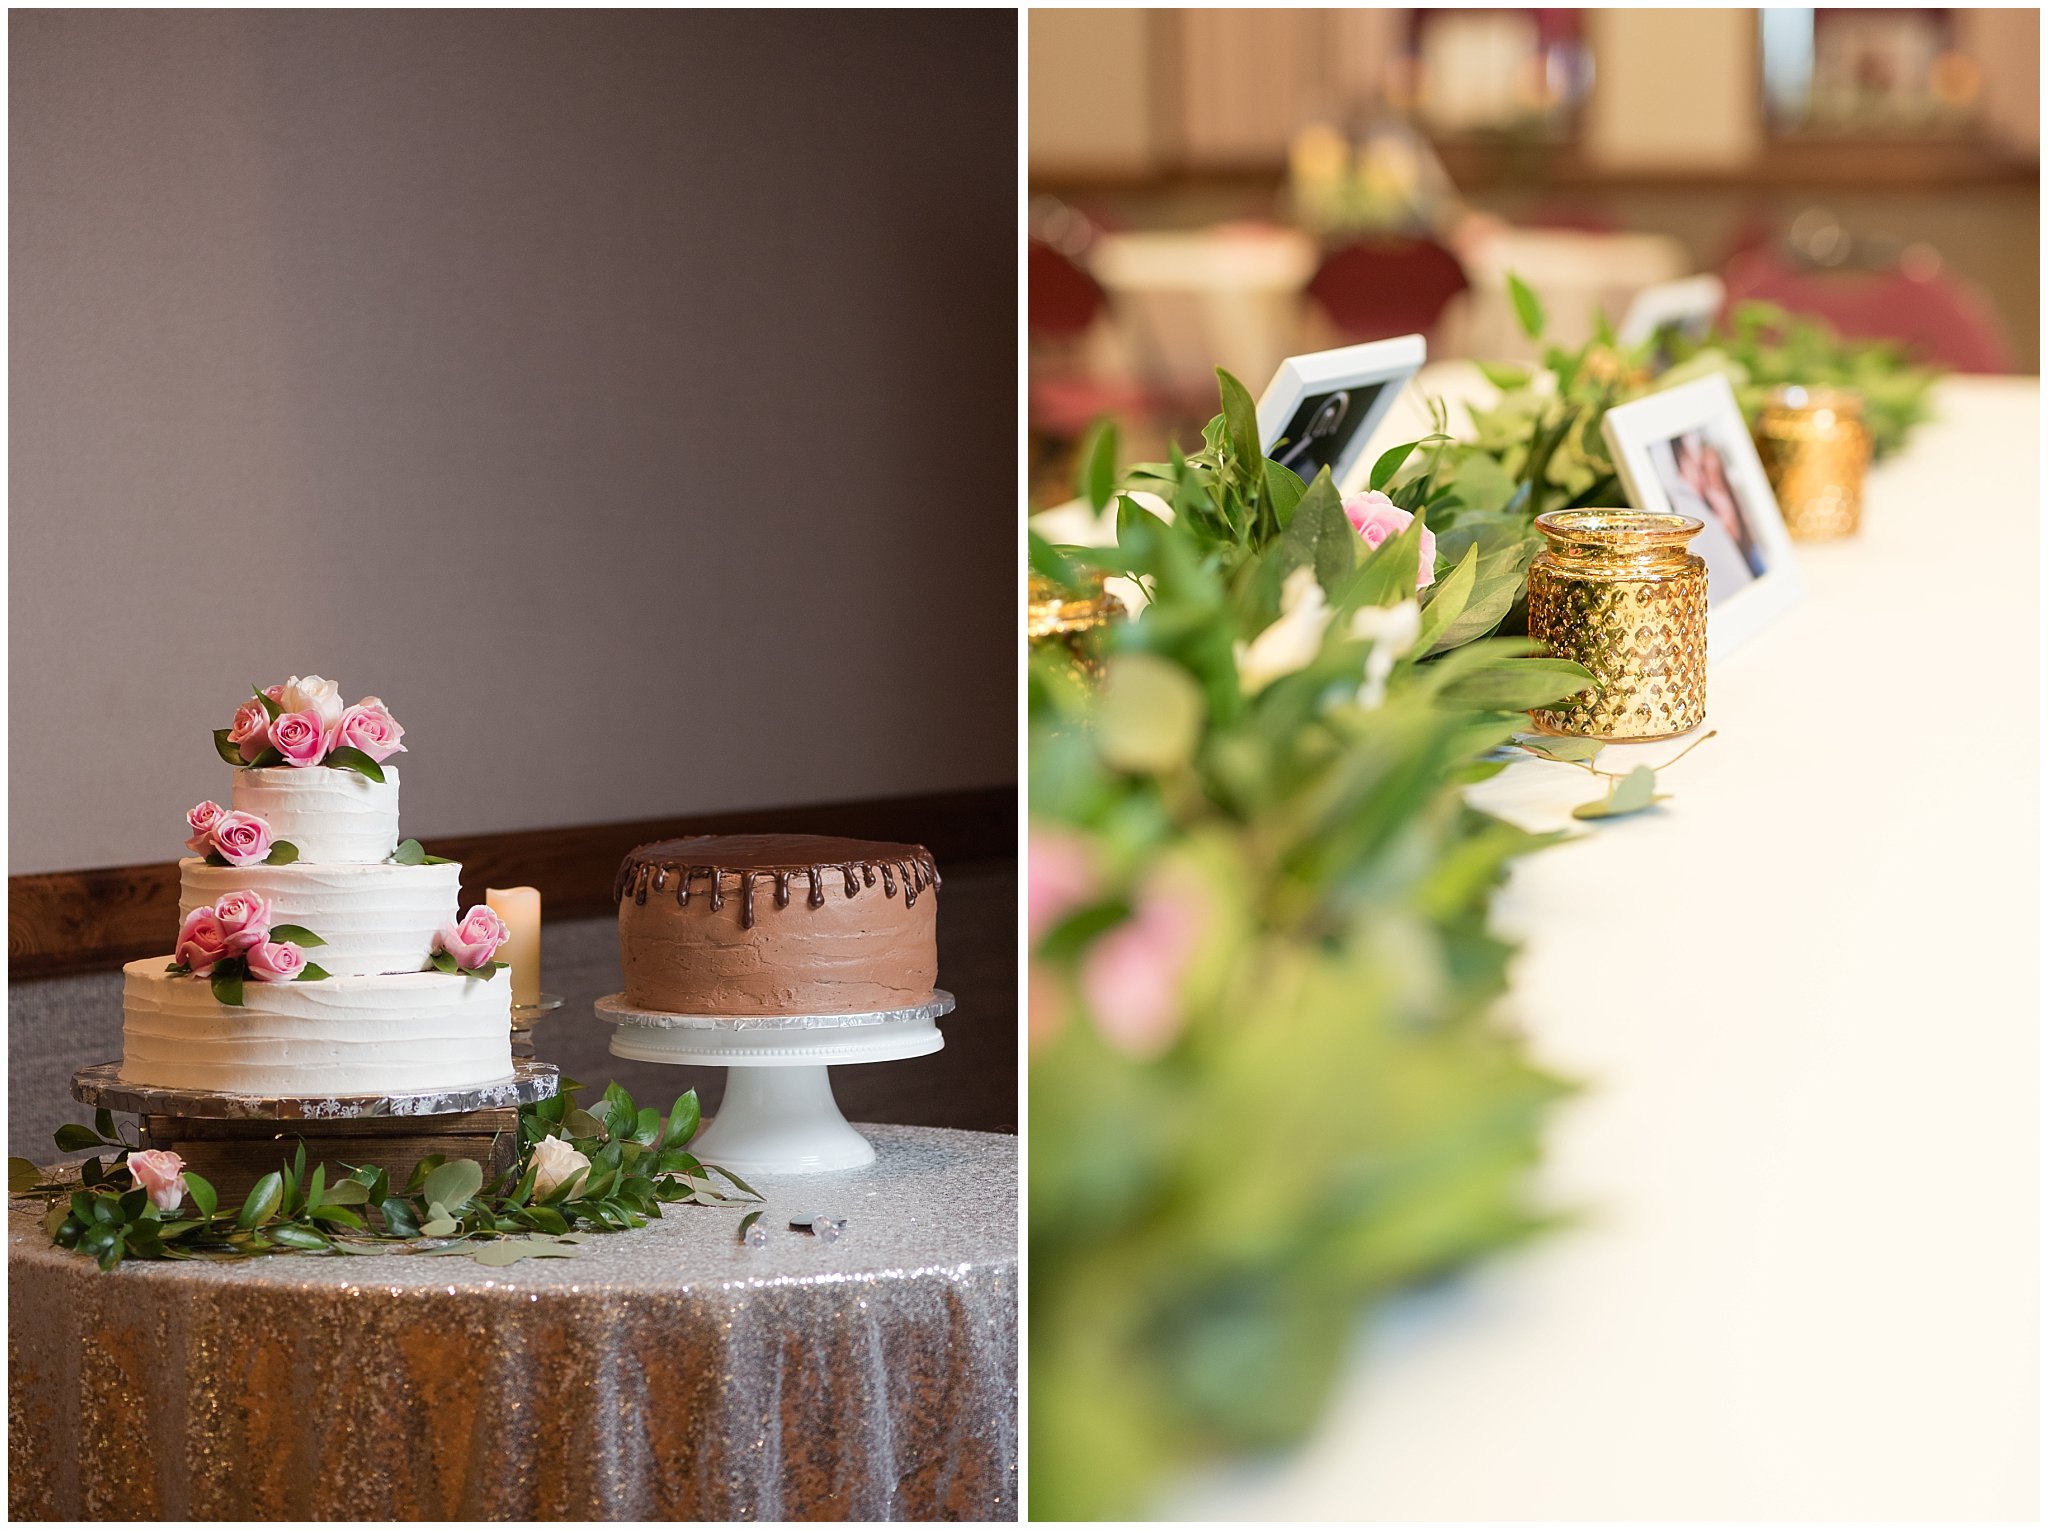 Wedding cakes and table centerpiece | Ogden Temple Wedding | Jessie and Dallin Photography